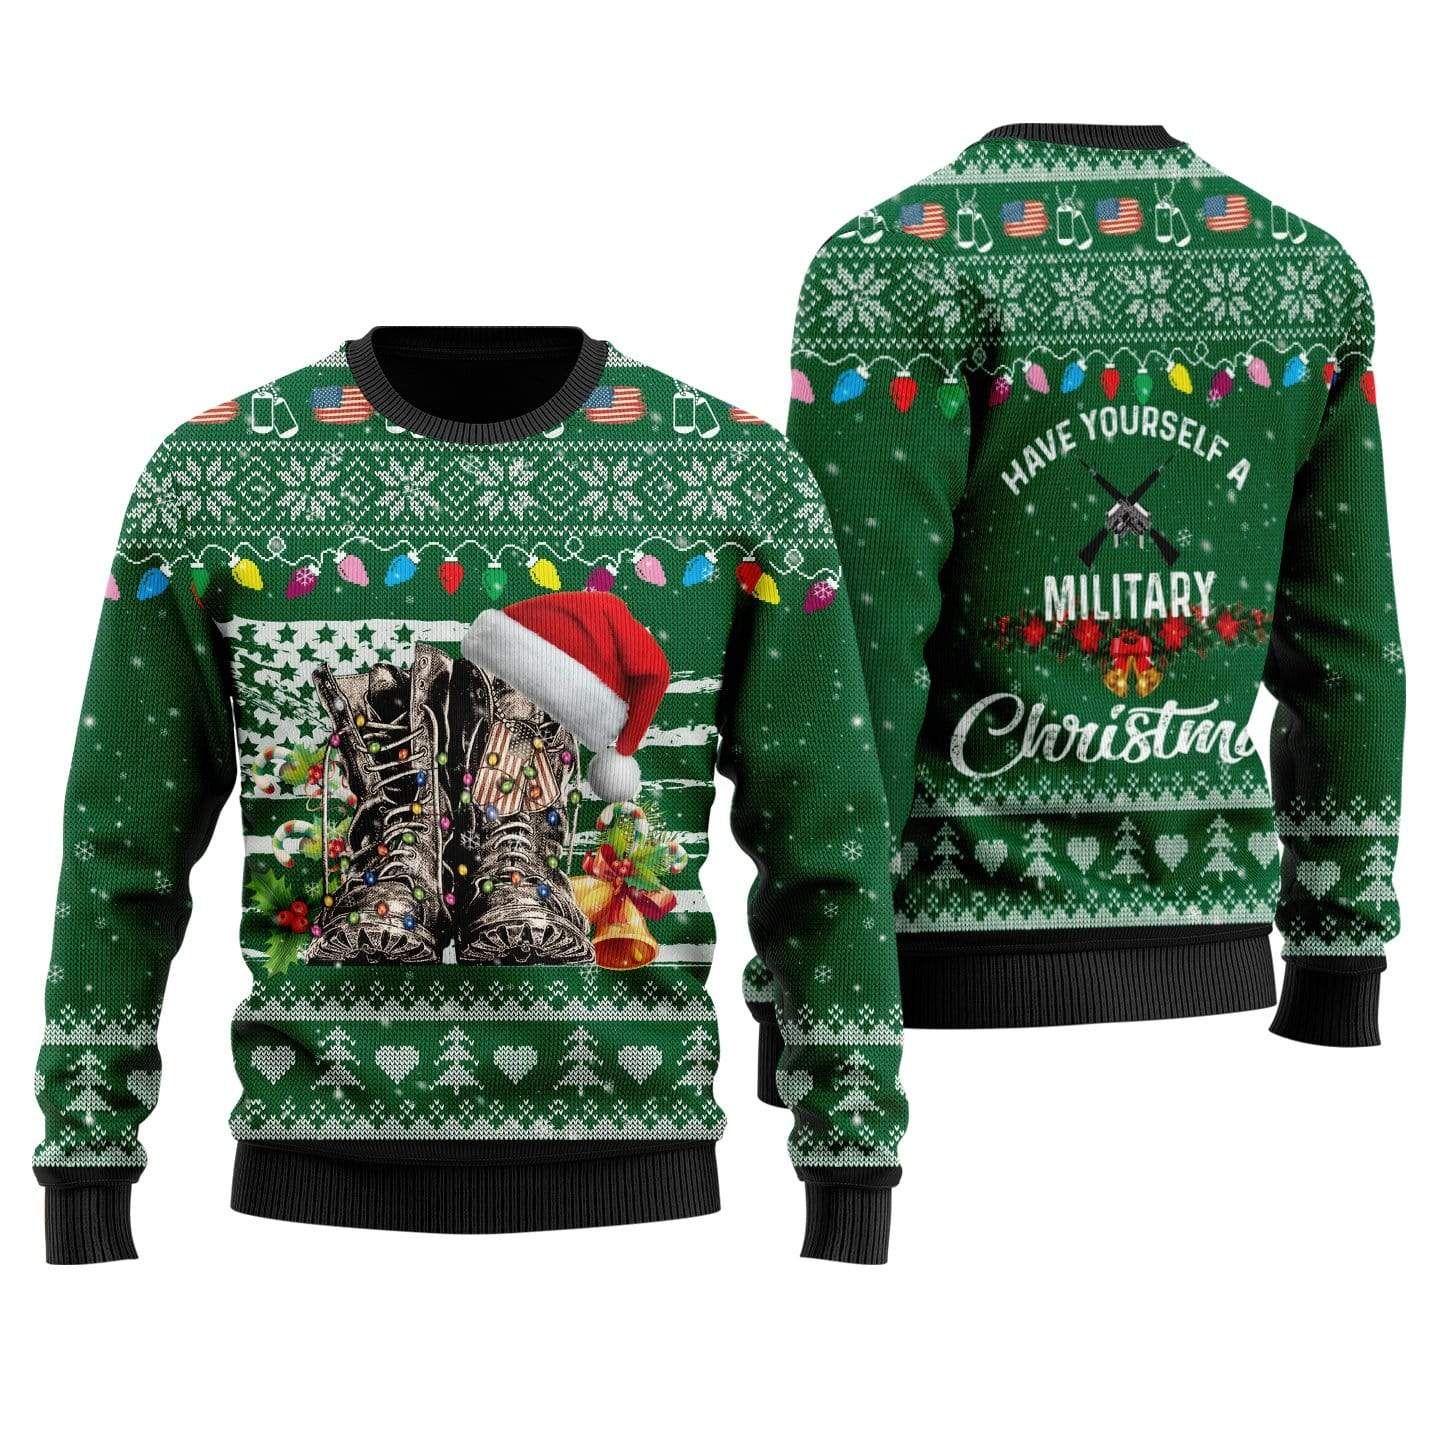 Soldiers Have Yourself A Military Christmas For Veterans Ugly Sweater